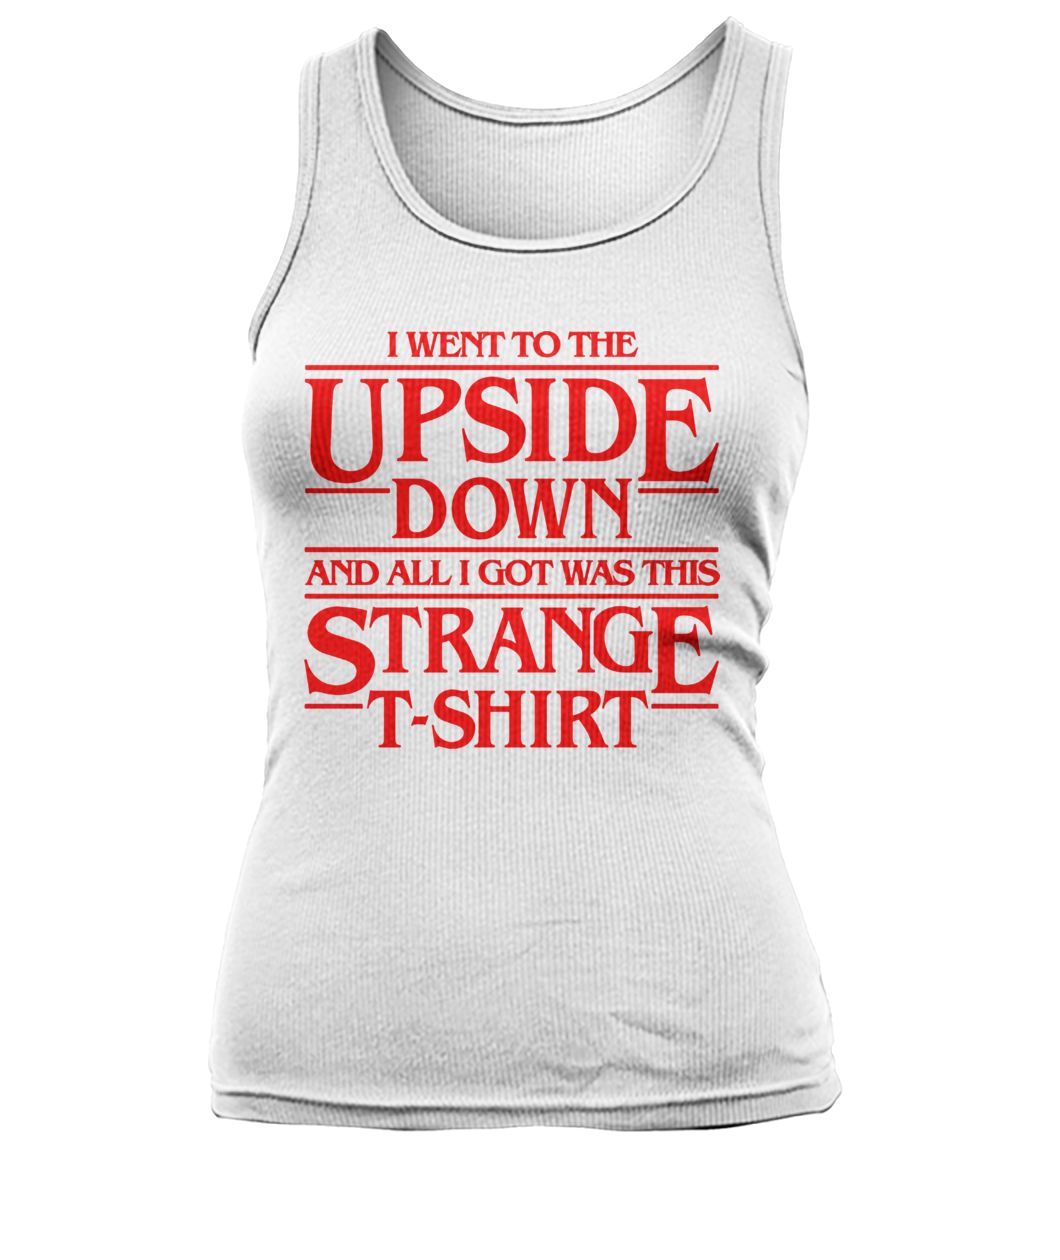 I went to the upside down and all i got was this strange t-shirt women's tank top